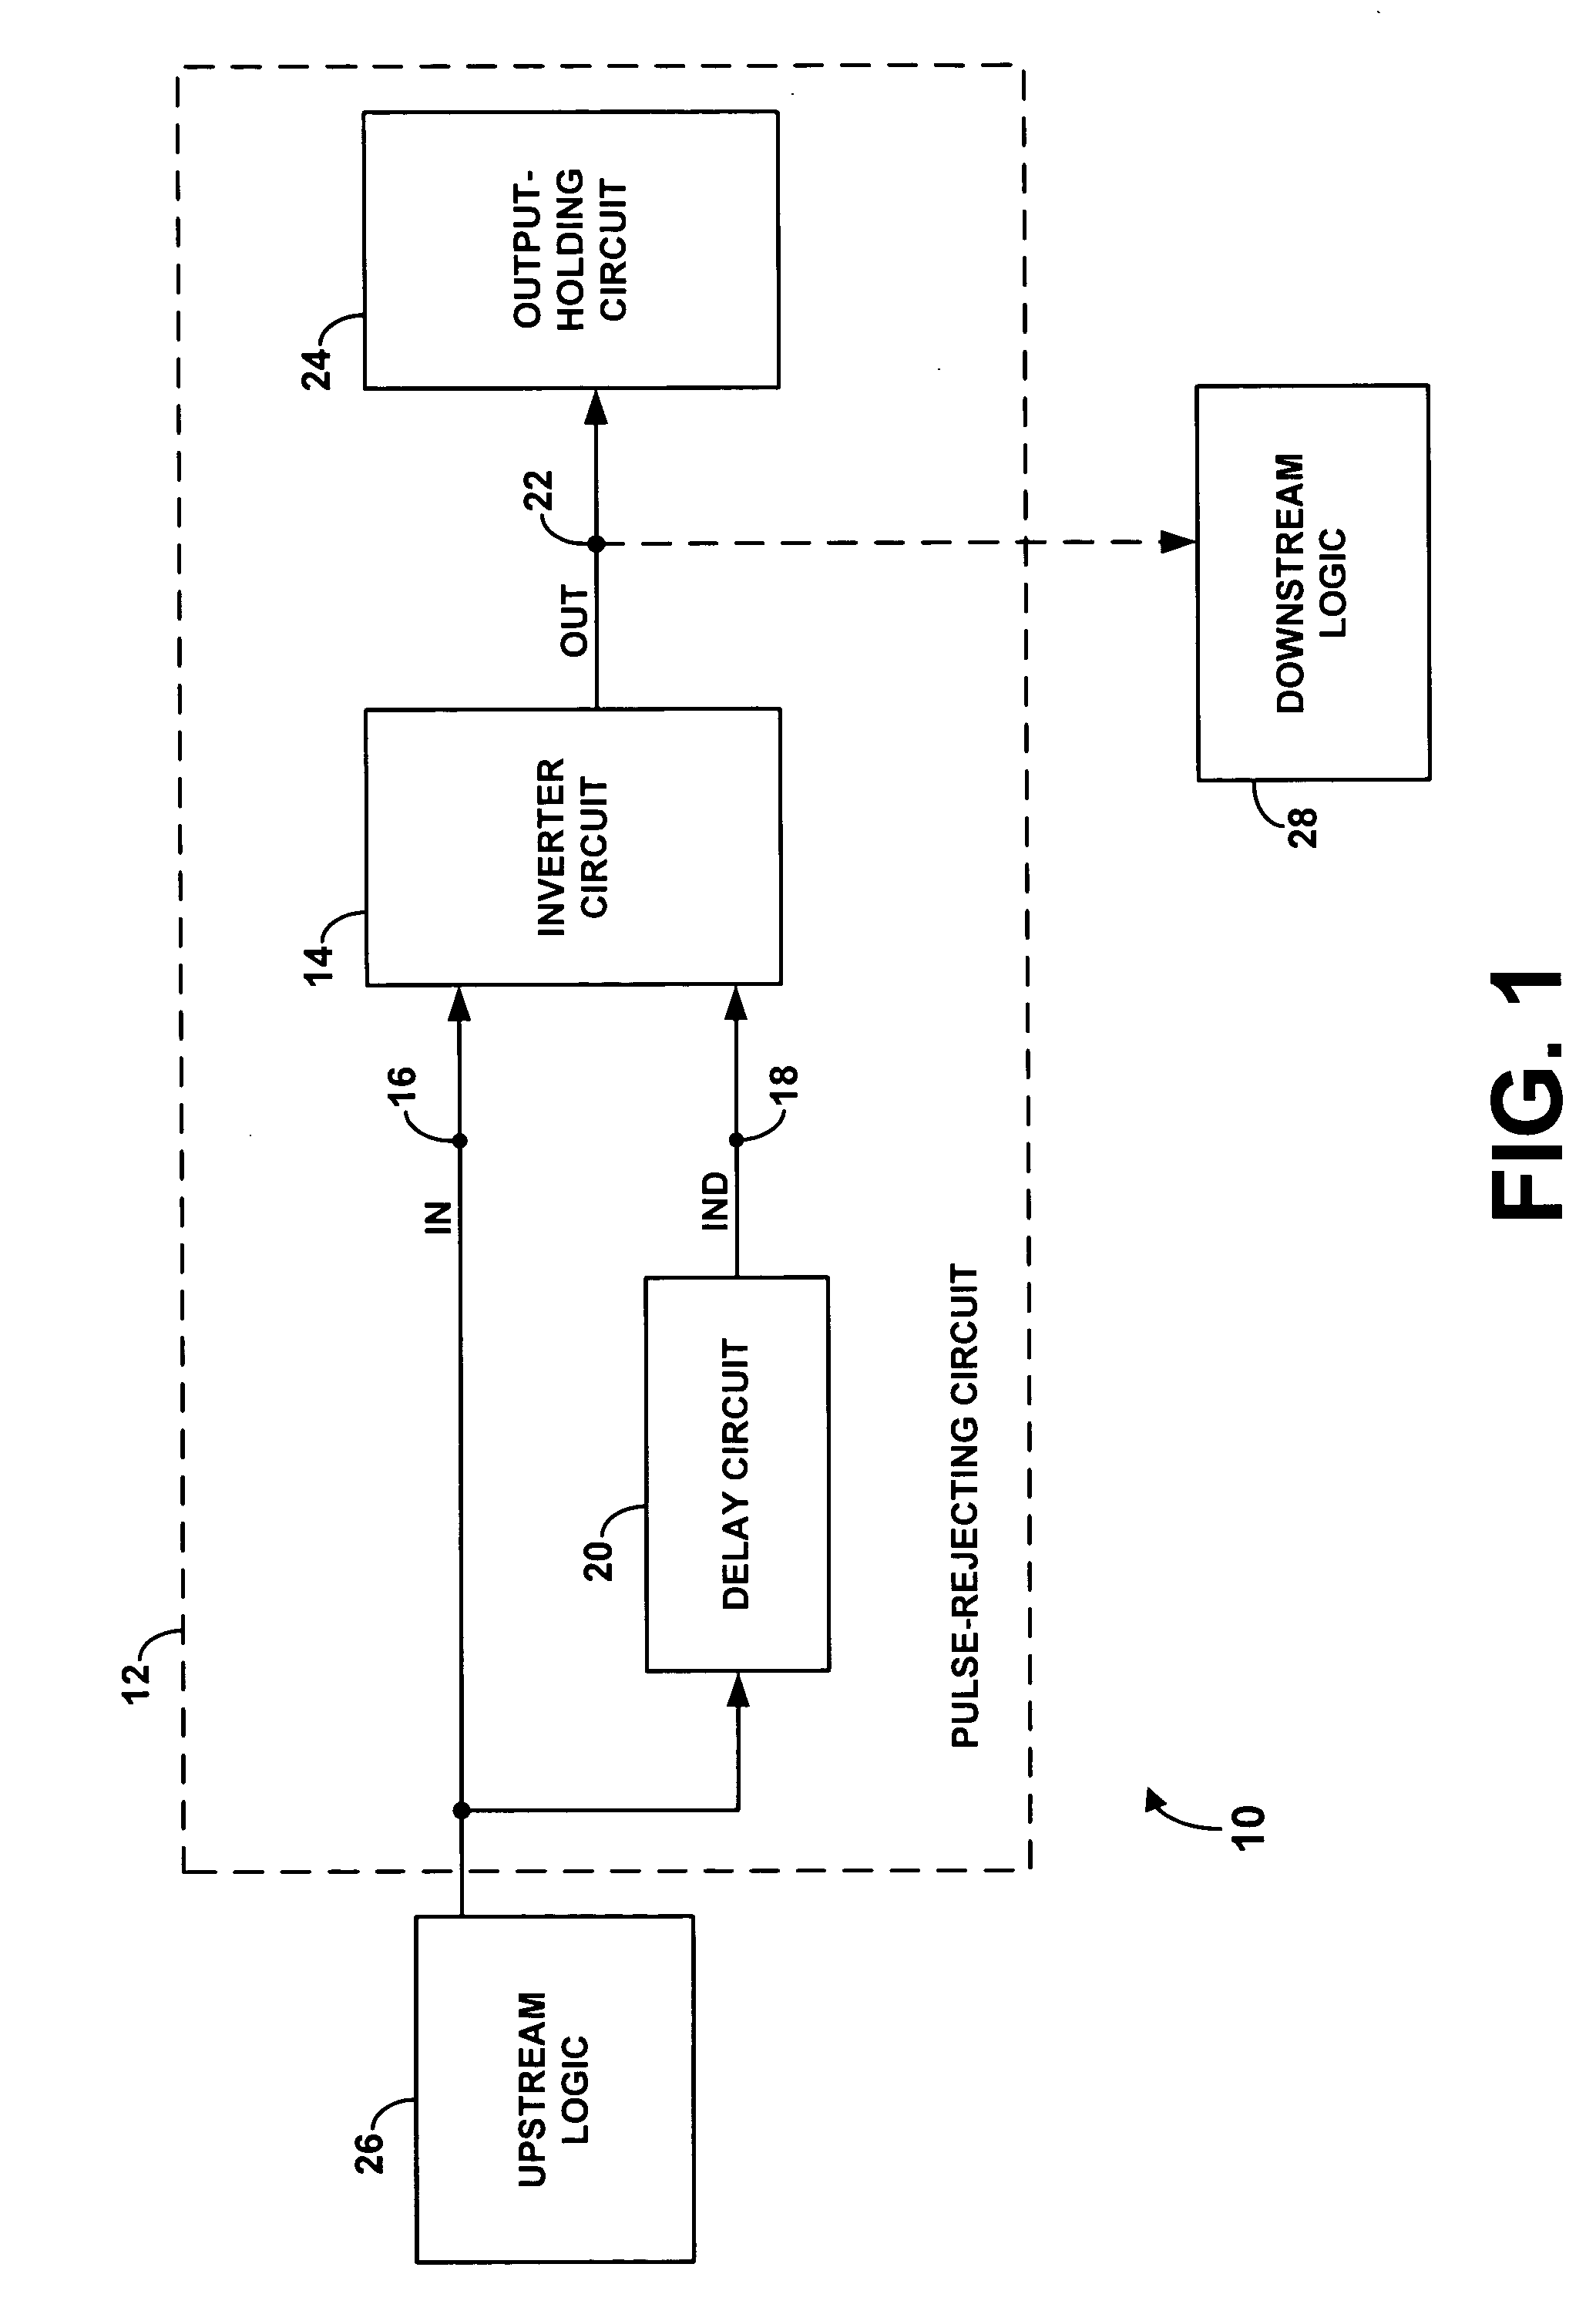 Pulse-rejecting circuit for suppressing single-event transients